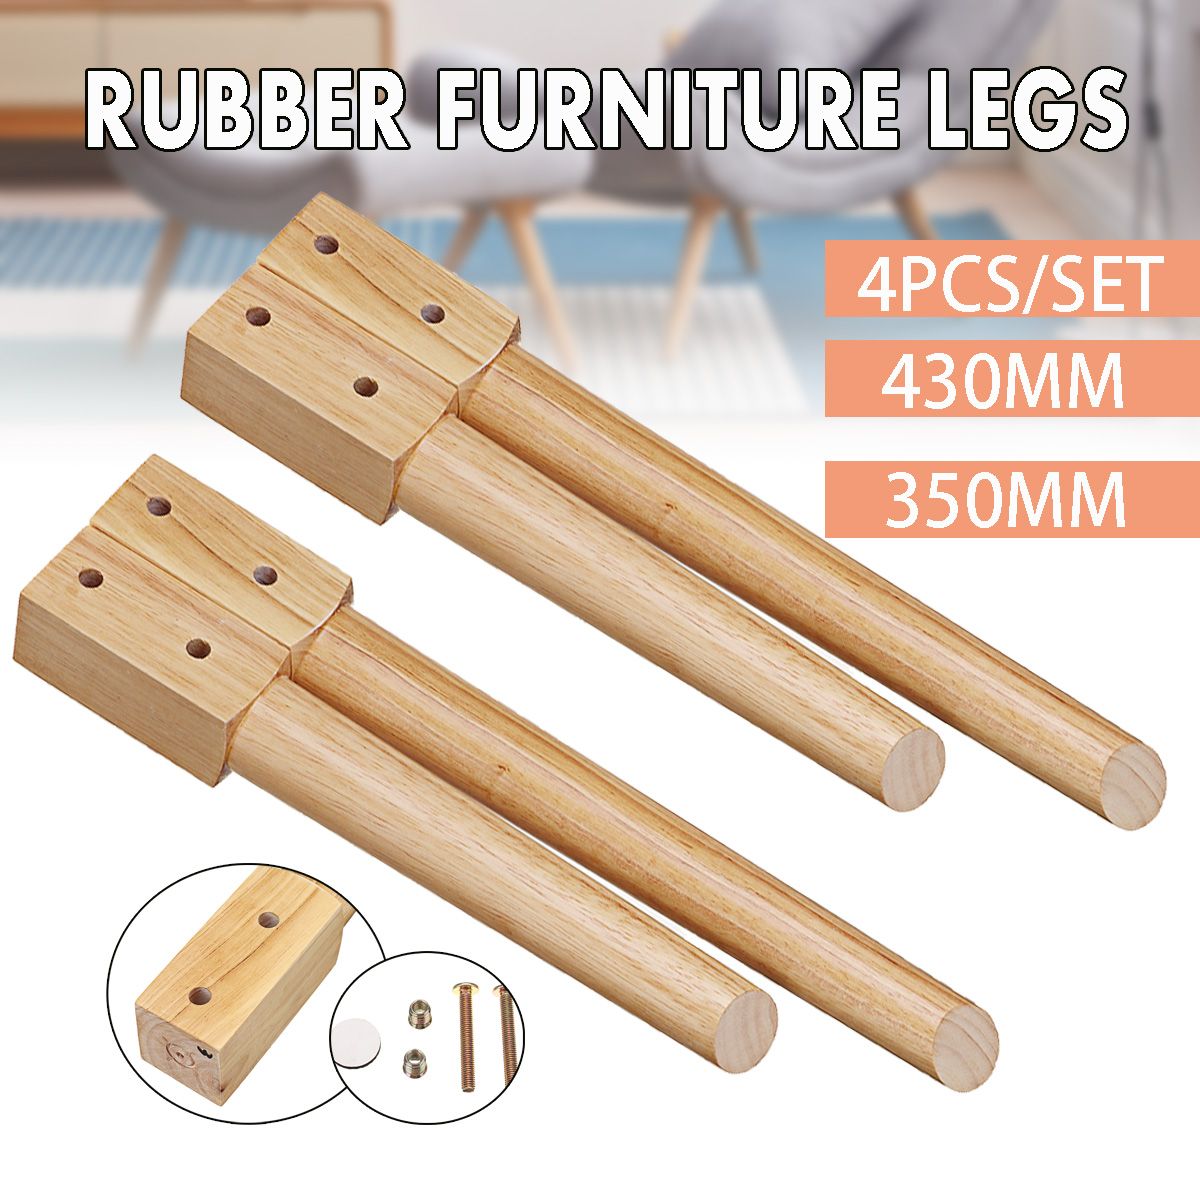 4PCSSET-Rubber-Wooden-Cone-Furniture-Legs-Sofa-Dining-Table-Chair-Stool-Parts-1757846